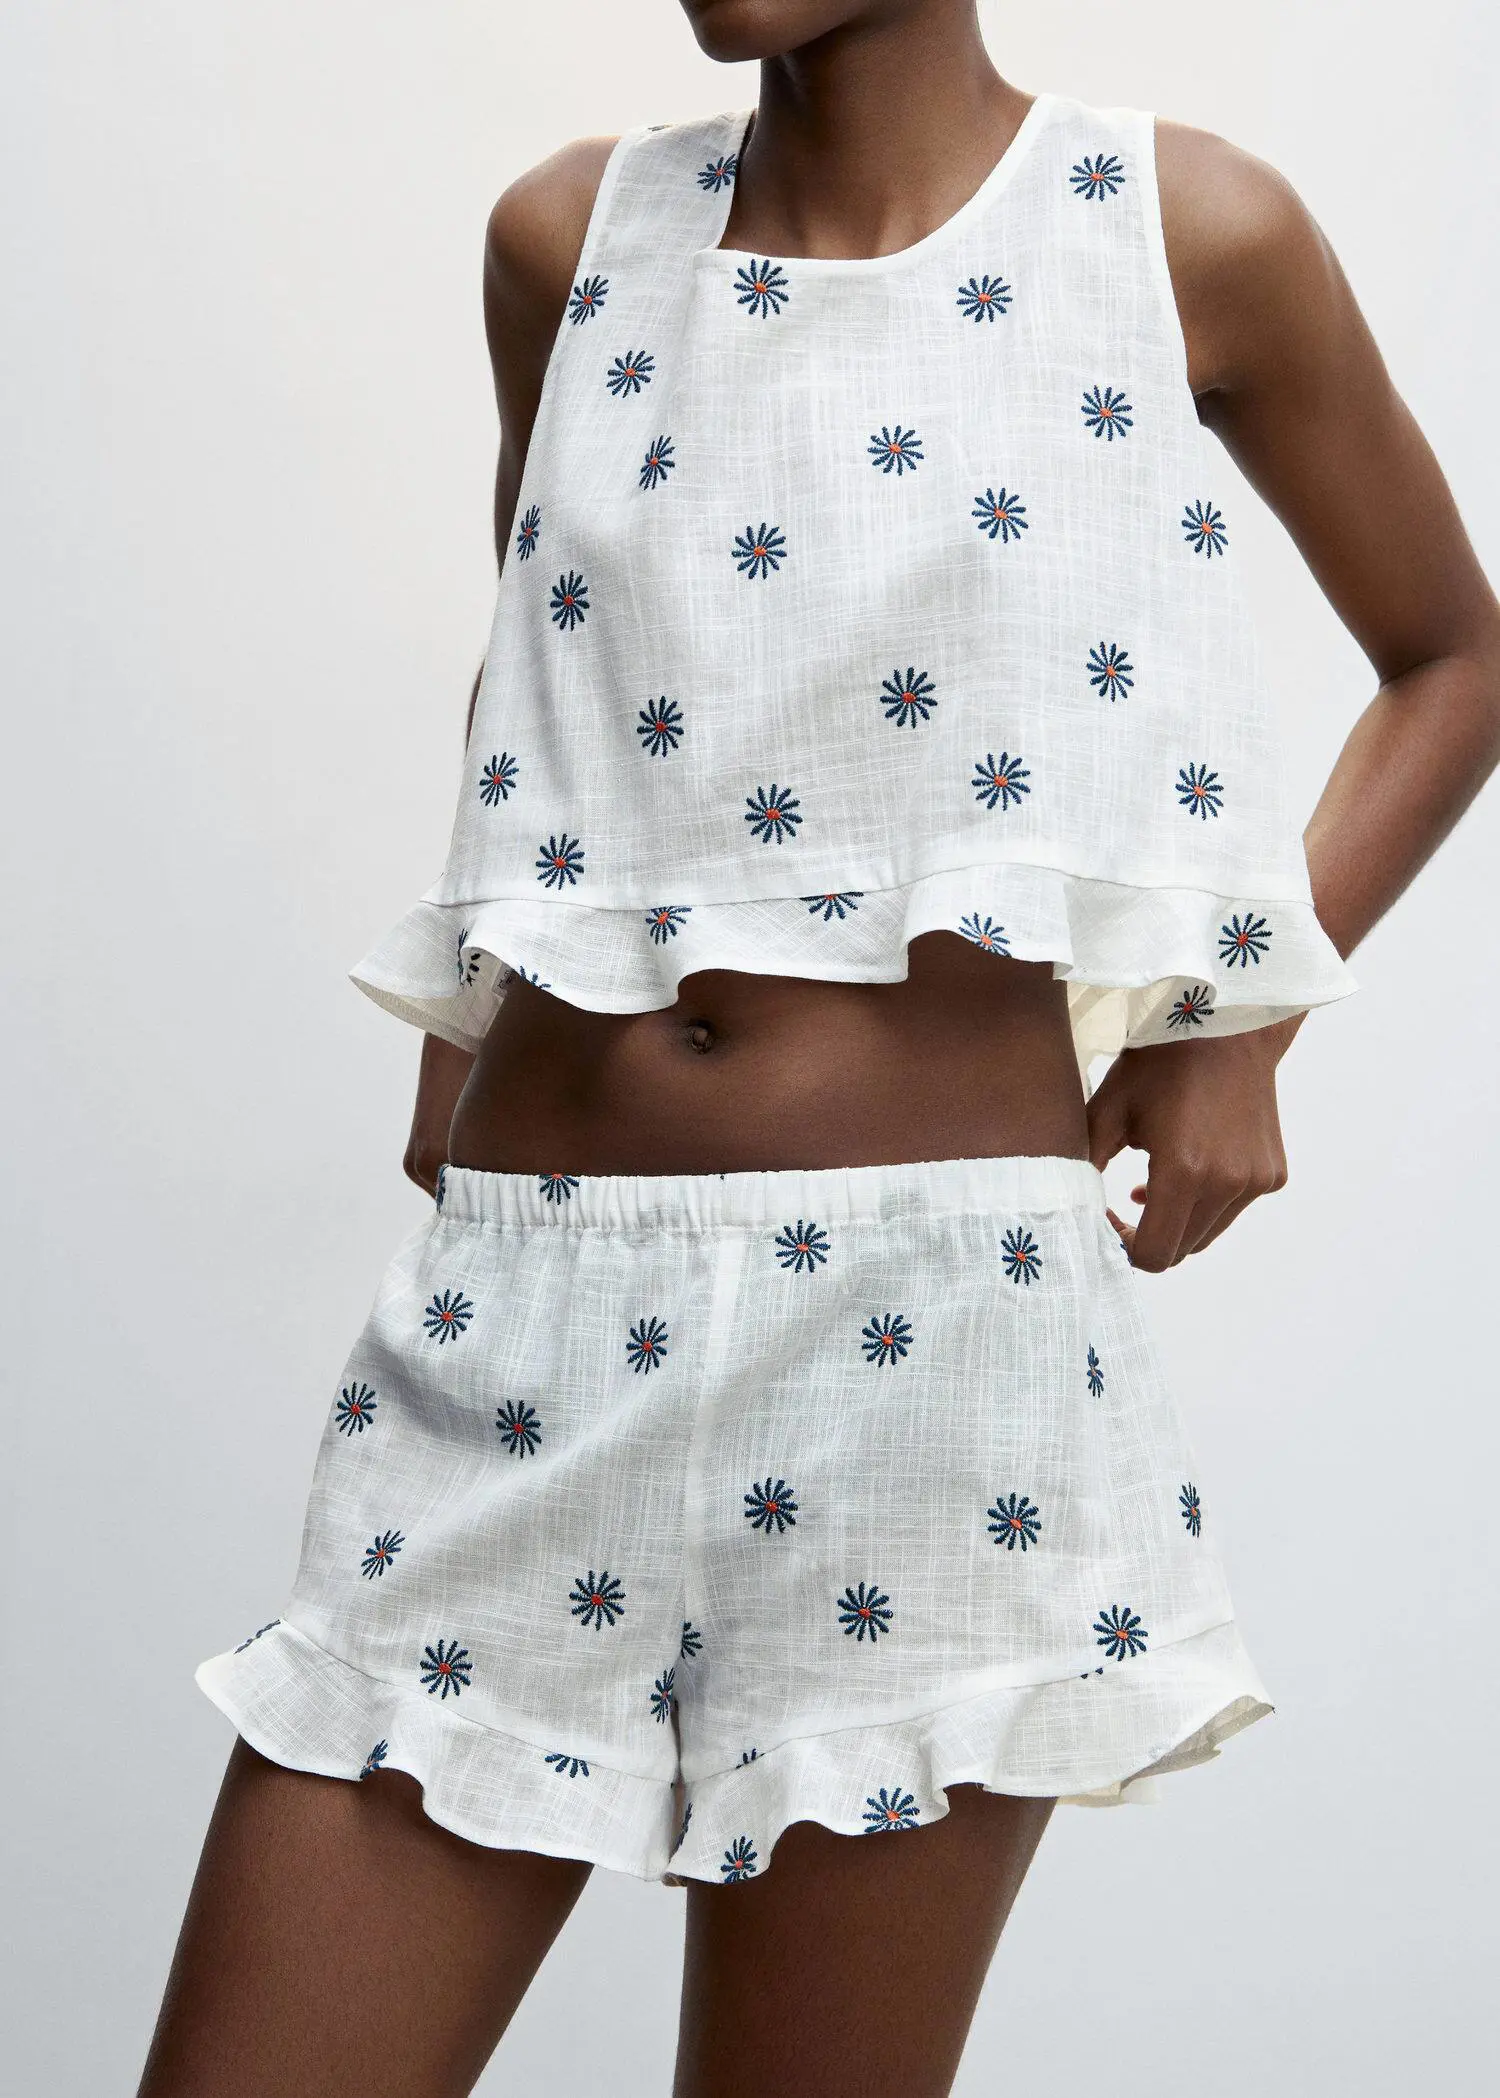 Mango Floral embroidered pajama shorts. a woman wearing a white outfit with blue and white flowers. 